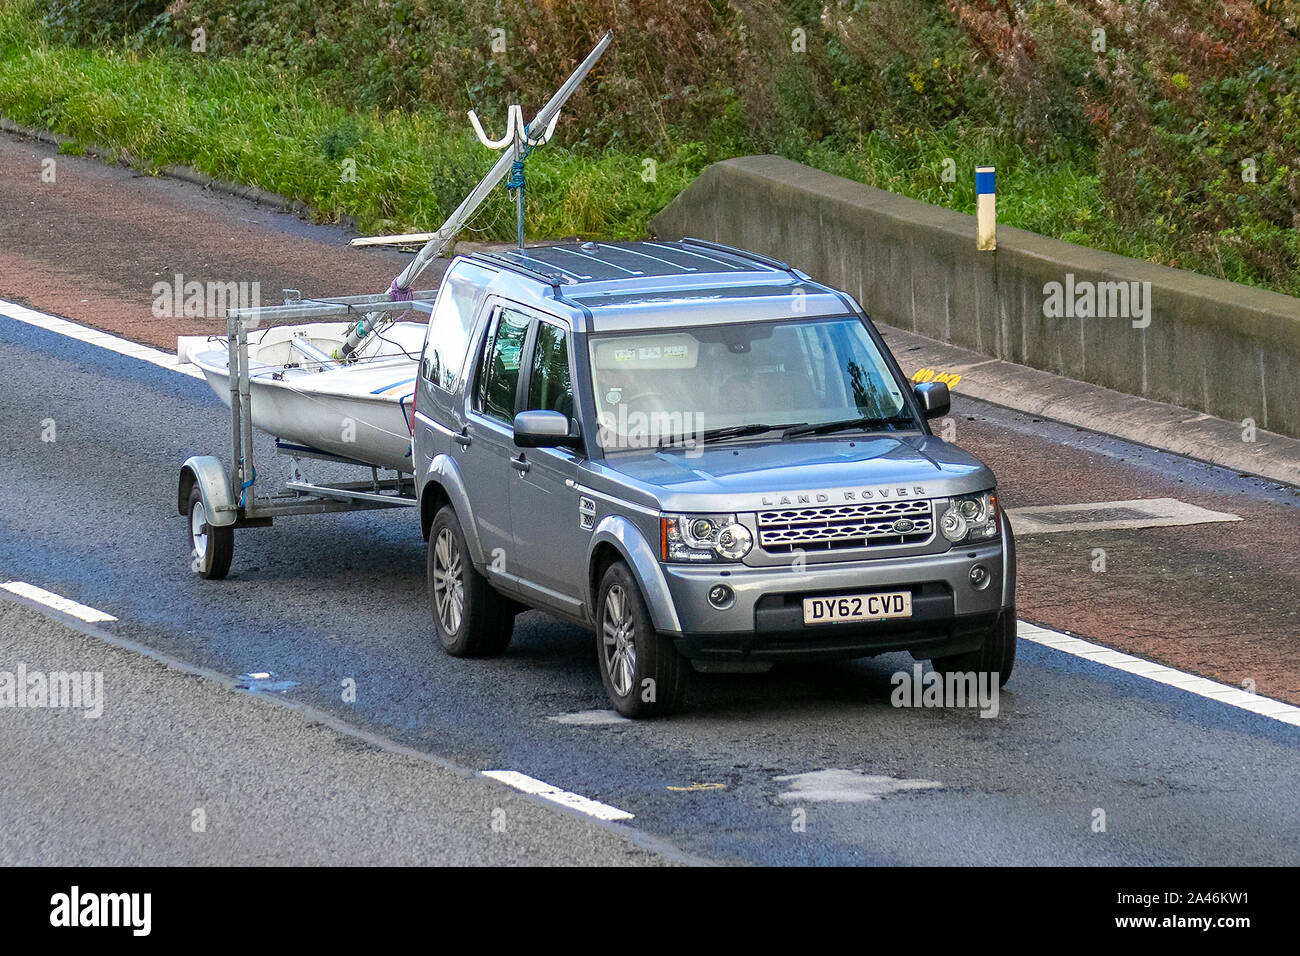 2012 GREY SILVER Land Rover Discovery XS Sdv6 Auto towing yacht on trailer; UK Vehicular traffic, transport, modern, saloon cars, south-bound on the 3 lane M6 motorway highway. Stock Photo